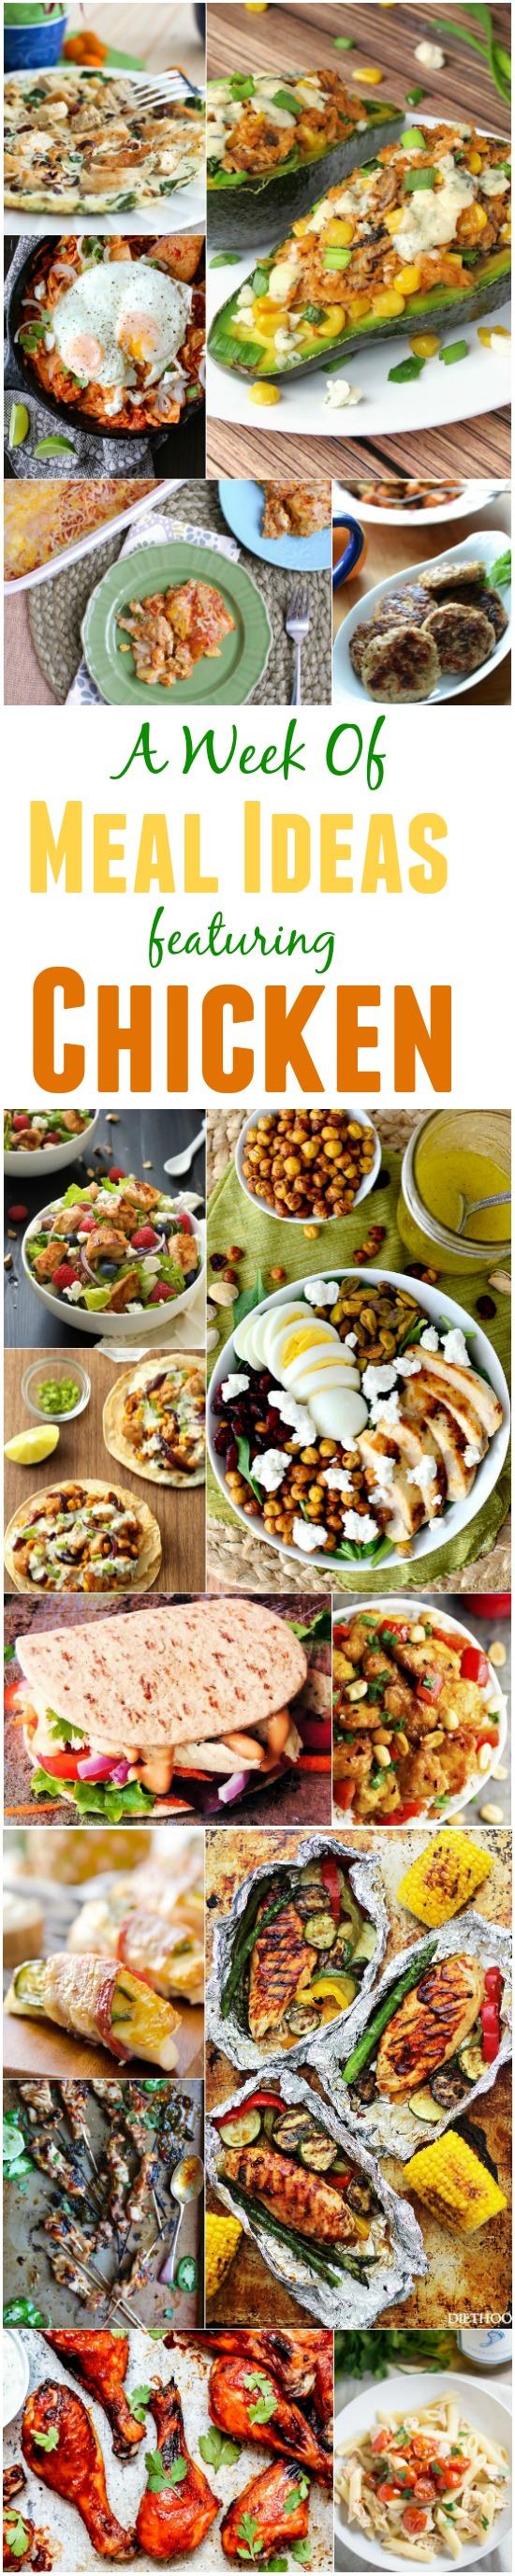 A Week of Meal Ideas Featuring Chicken